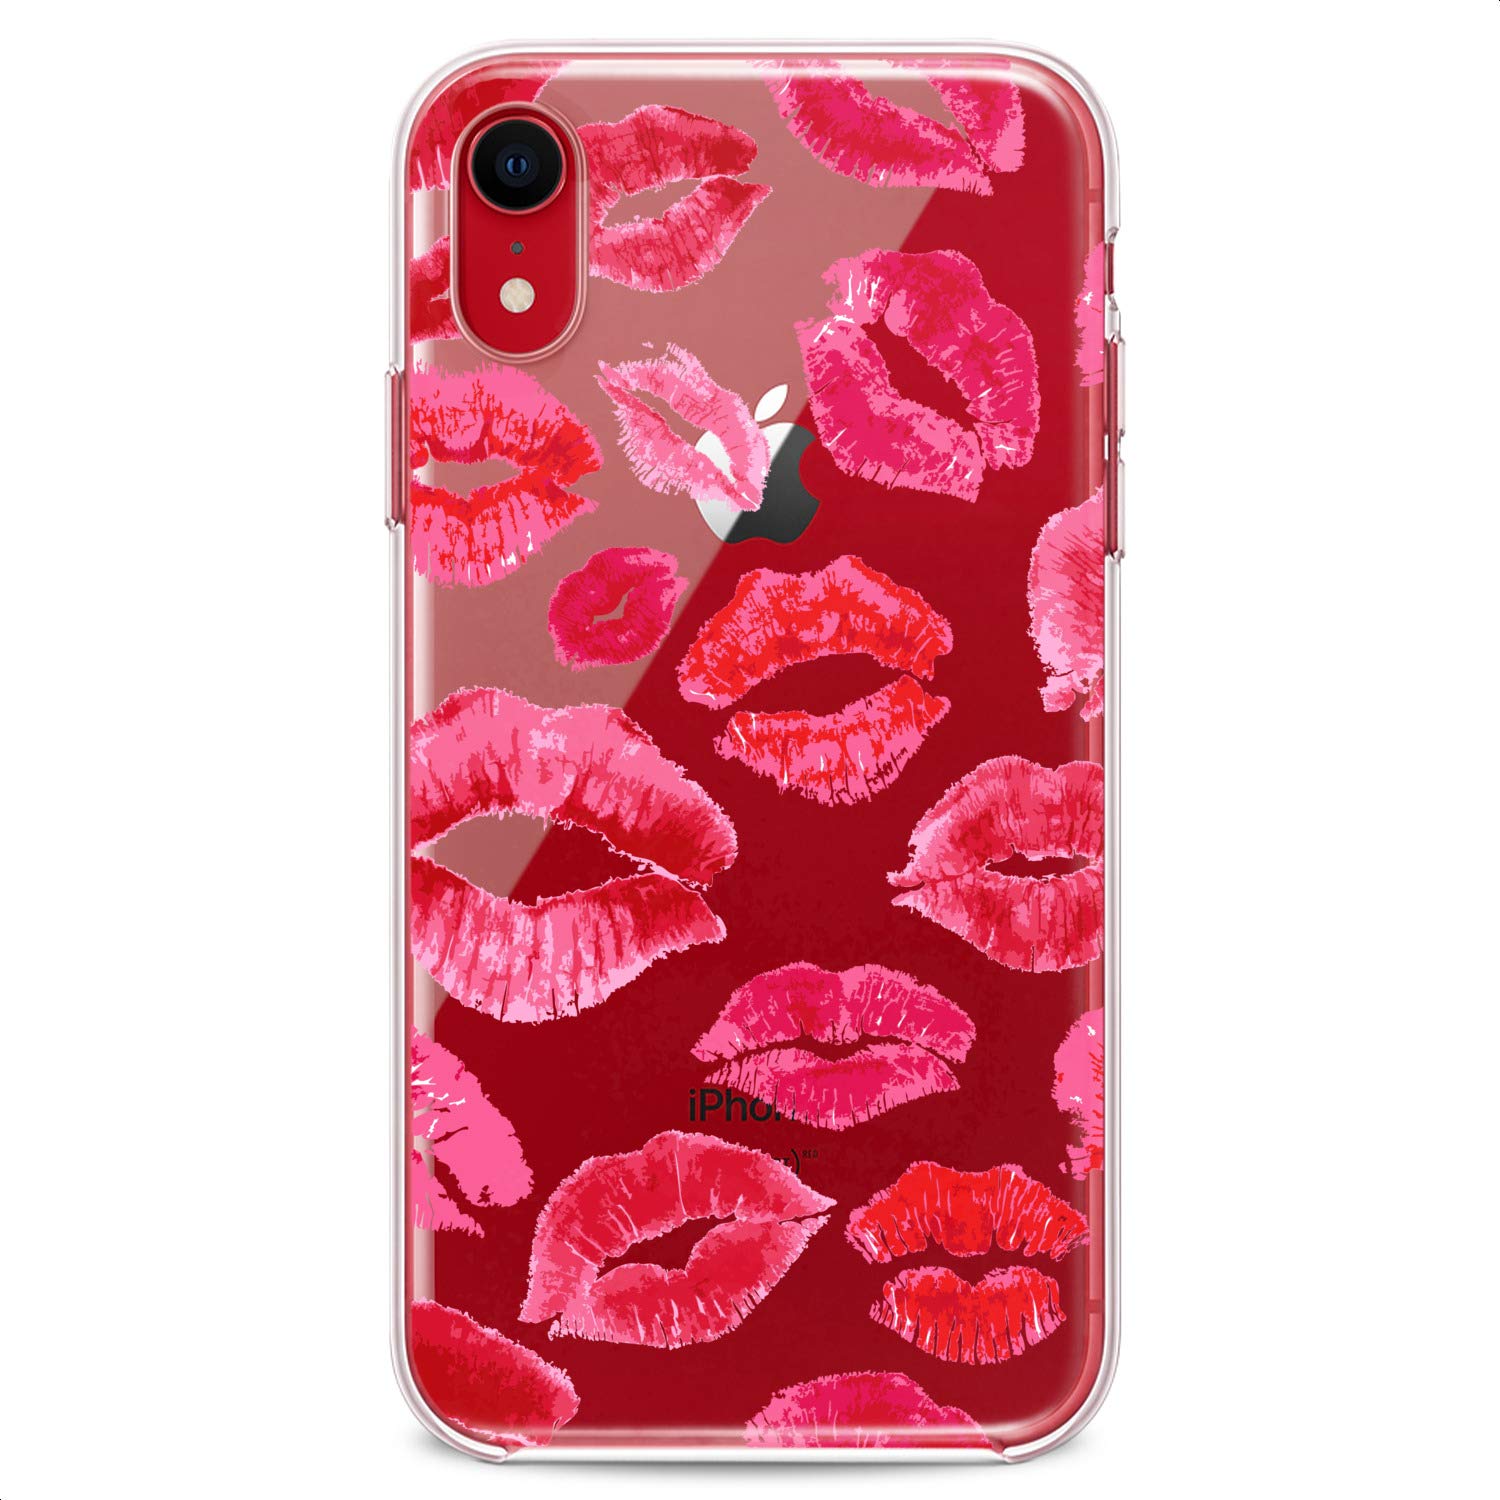 Cavka TPU Case Compatible with iPhone 15 14 13 12 11 Pro Max Plus Mini Xs Xr X 8+ 7 6 5 SE Red Kisses Flexible Silicone Clear Slim fit Female Design Cute Bright Big Lips Pink Print Girlish Lipstick